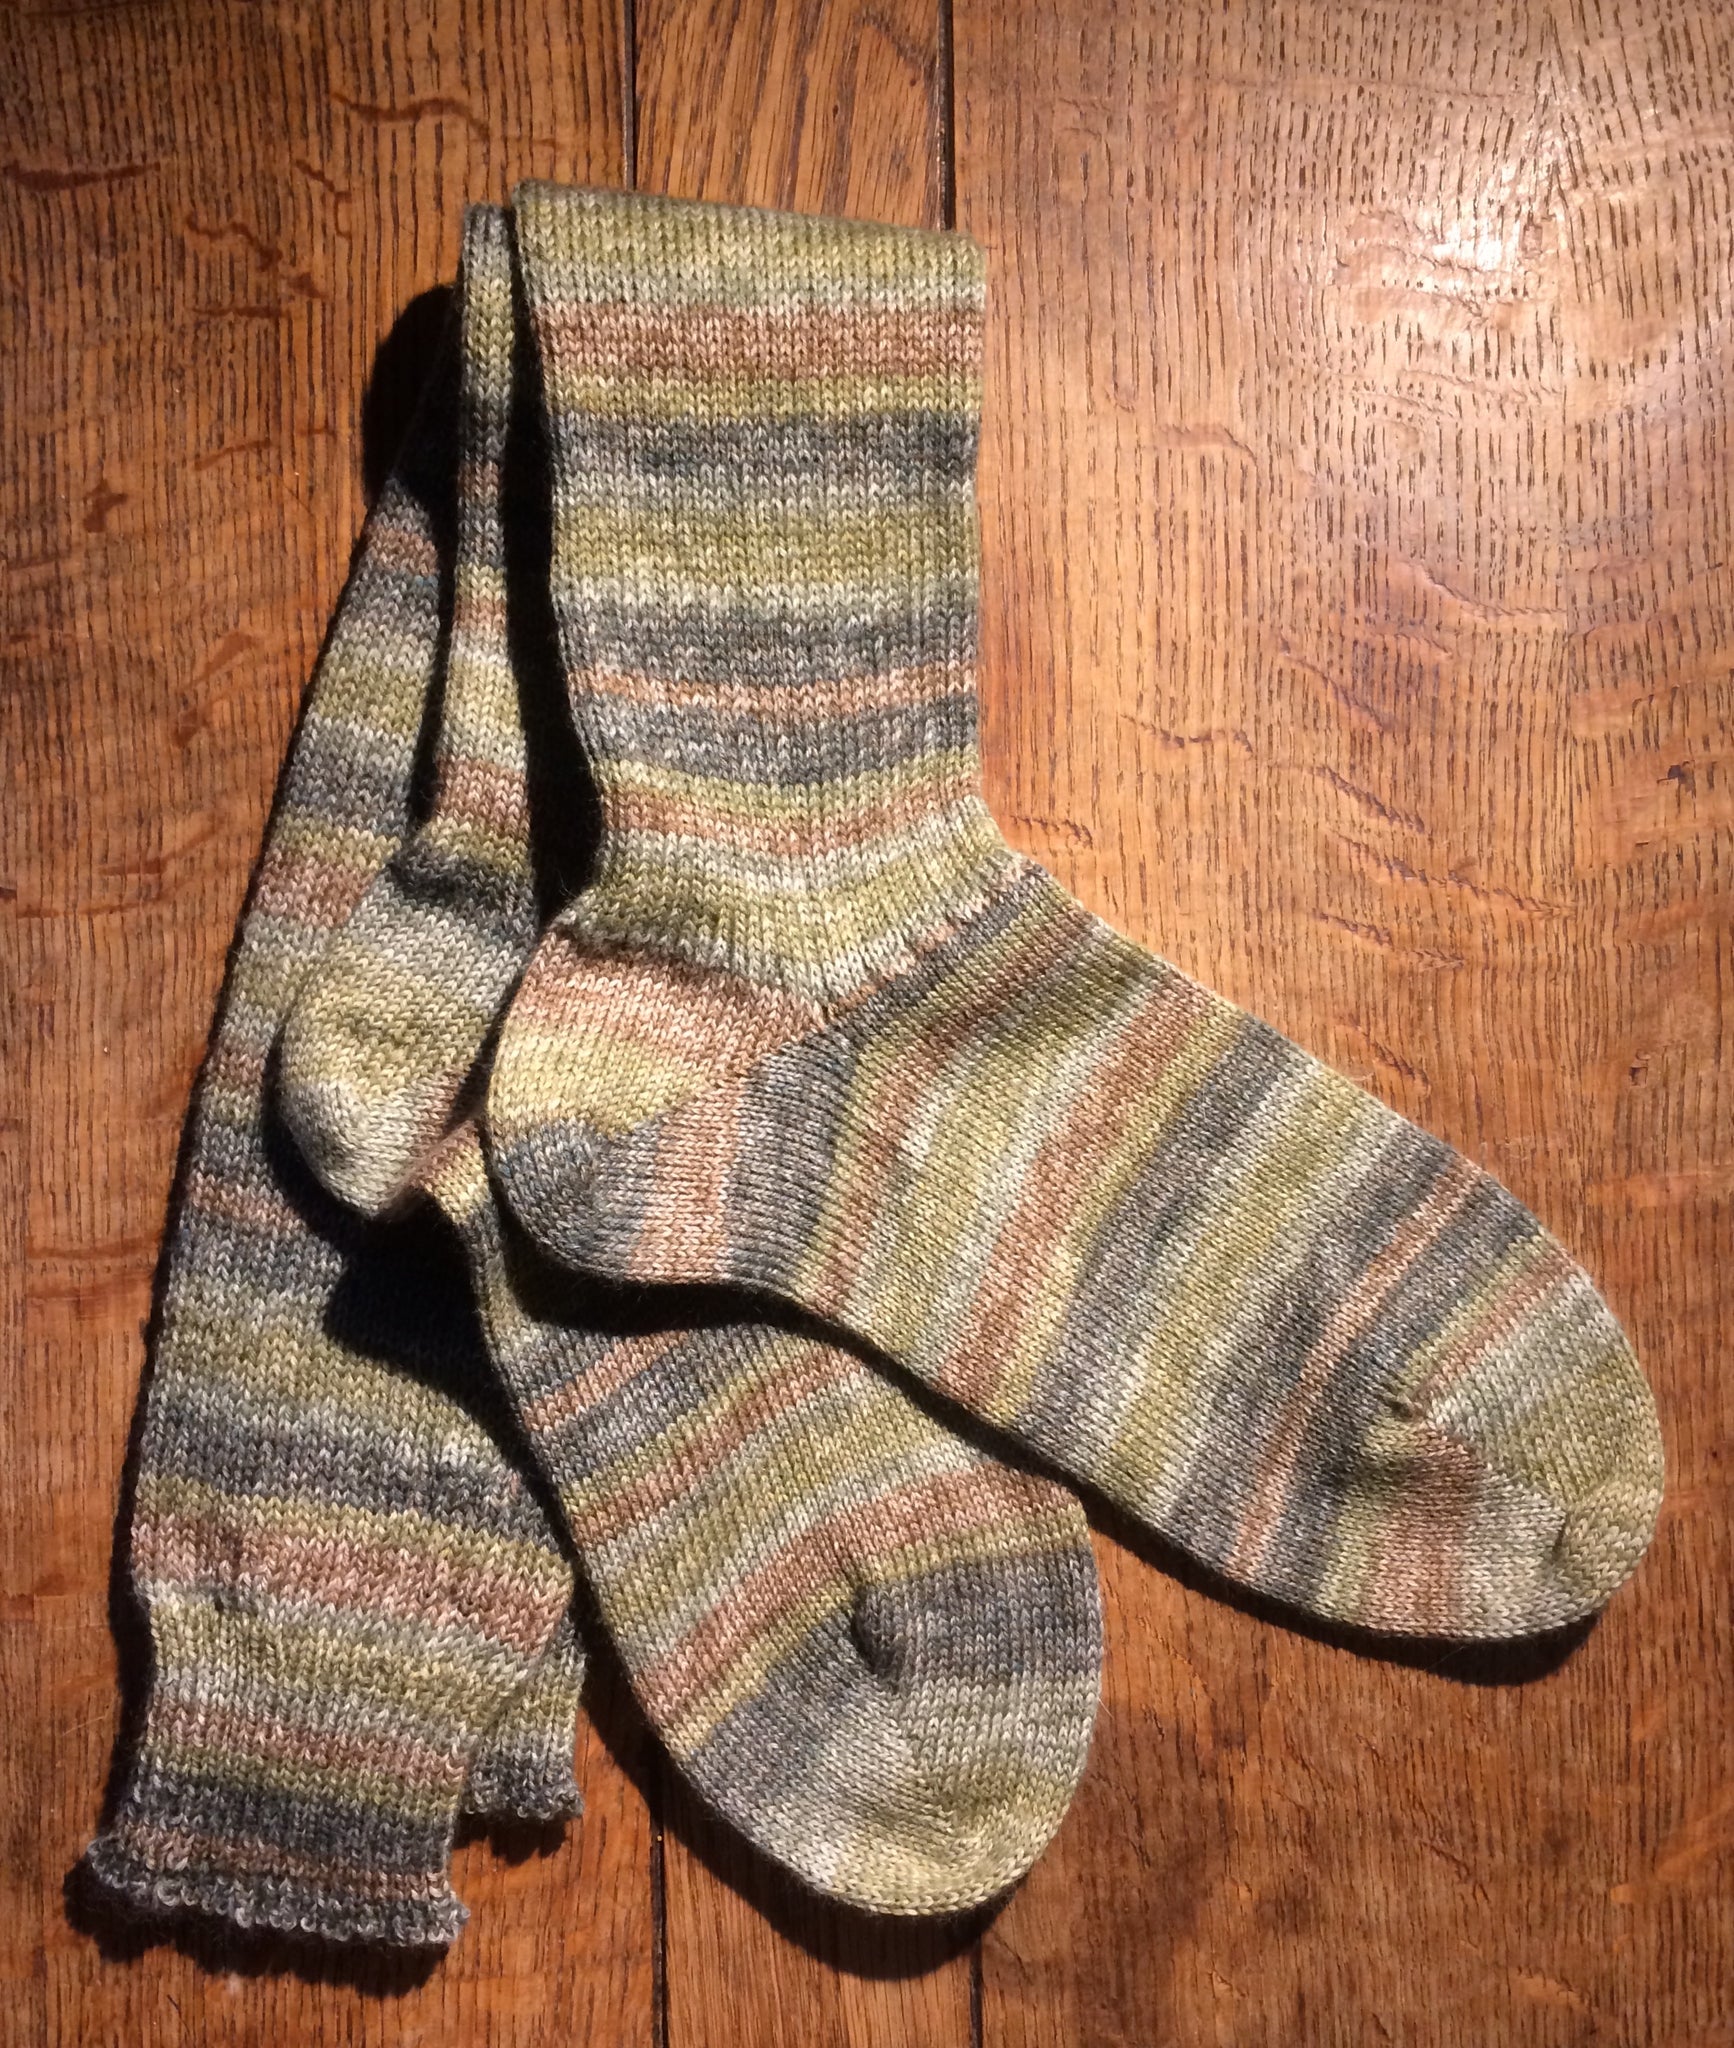 Lichen green hand cranked wool blend everyday boot socks (size 8-10)